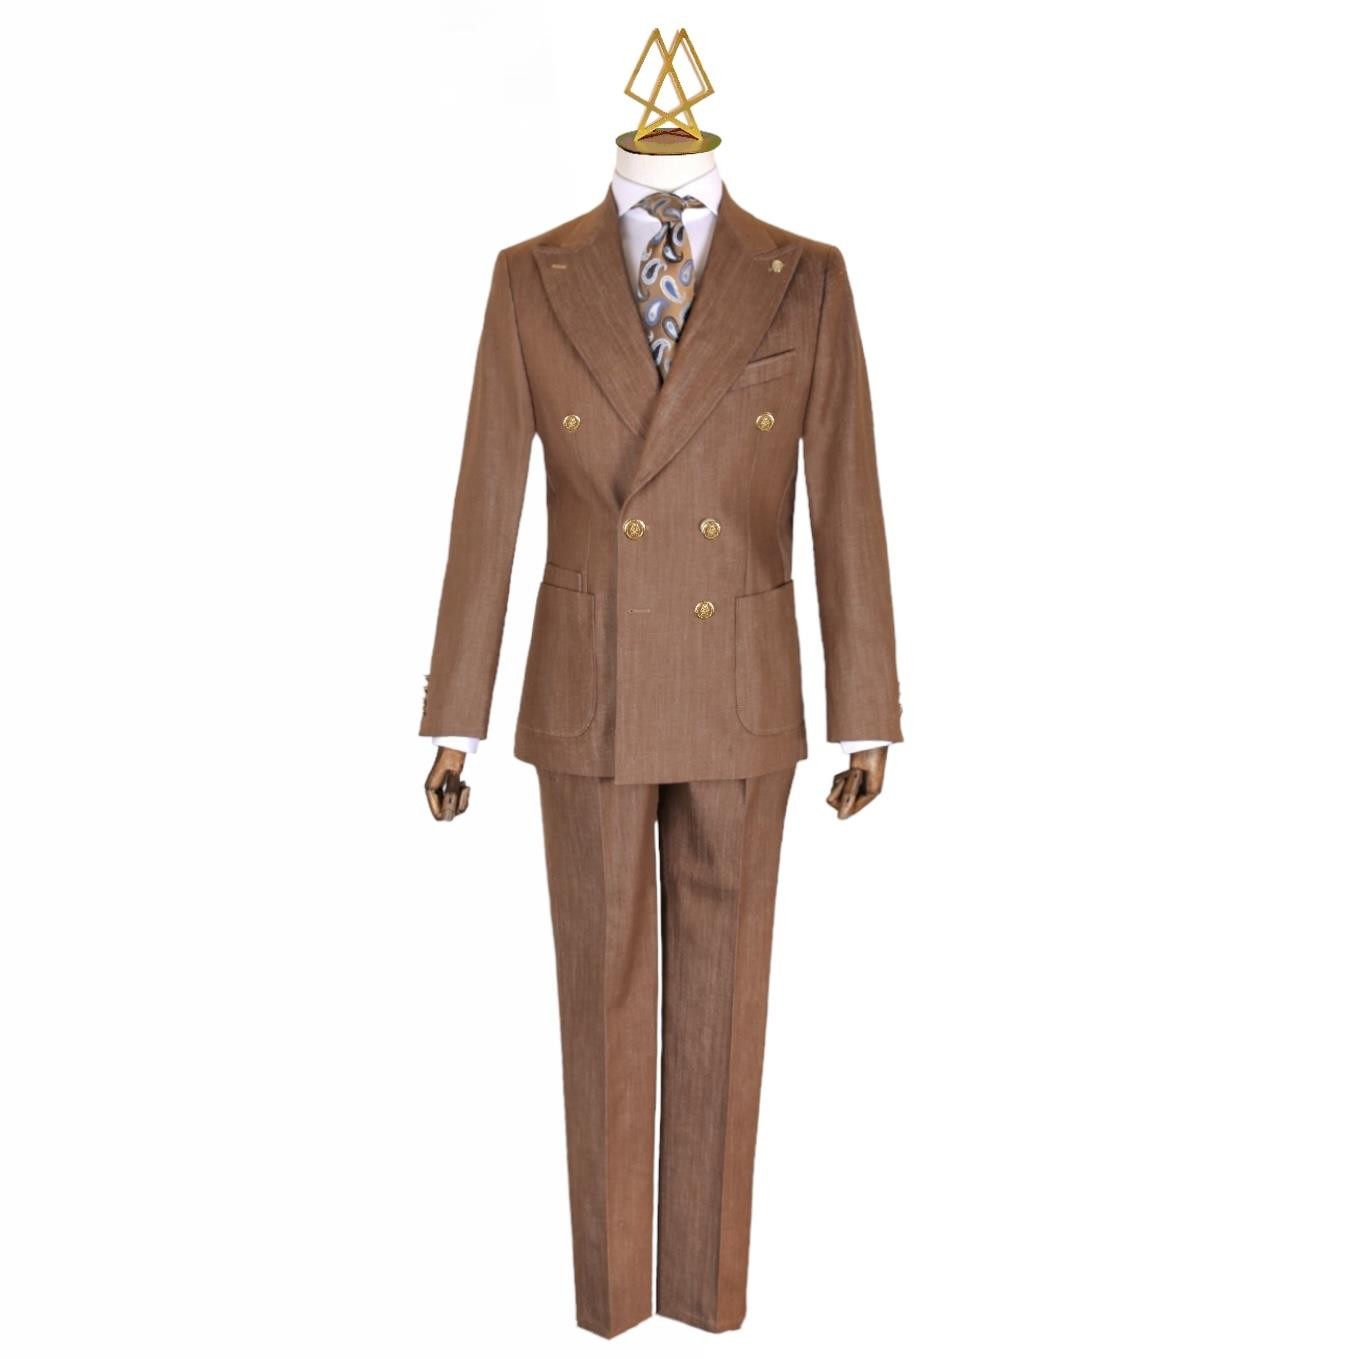 BROWN DOUBLE BREASTED DENIM SUIT